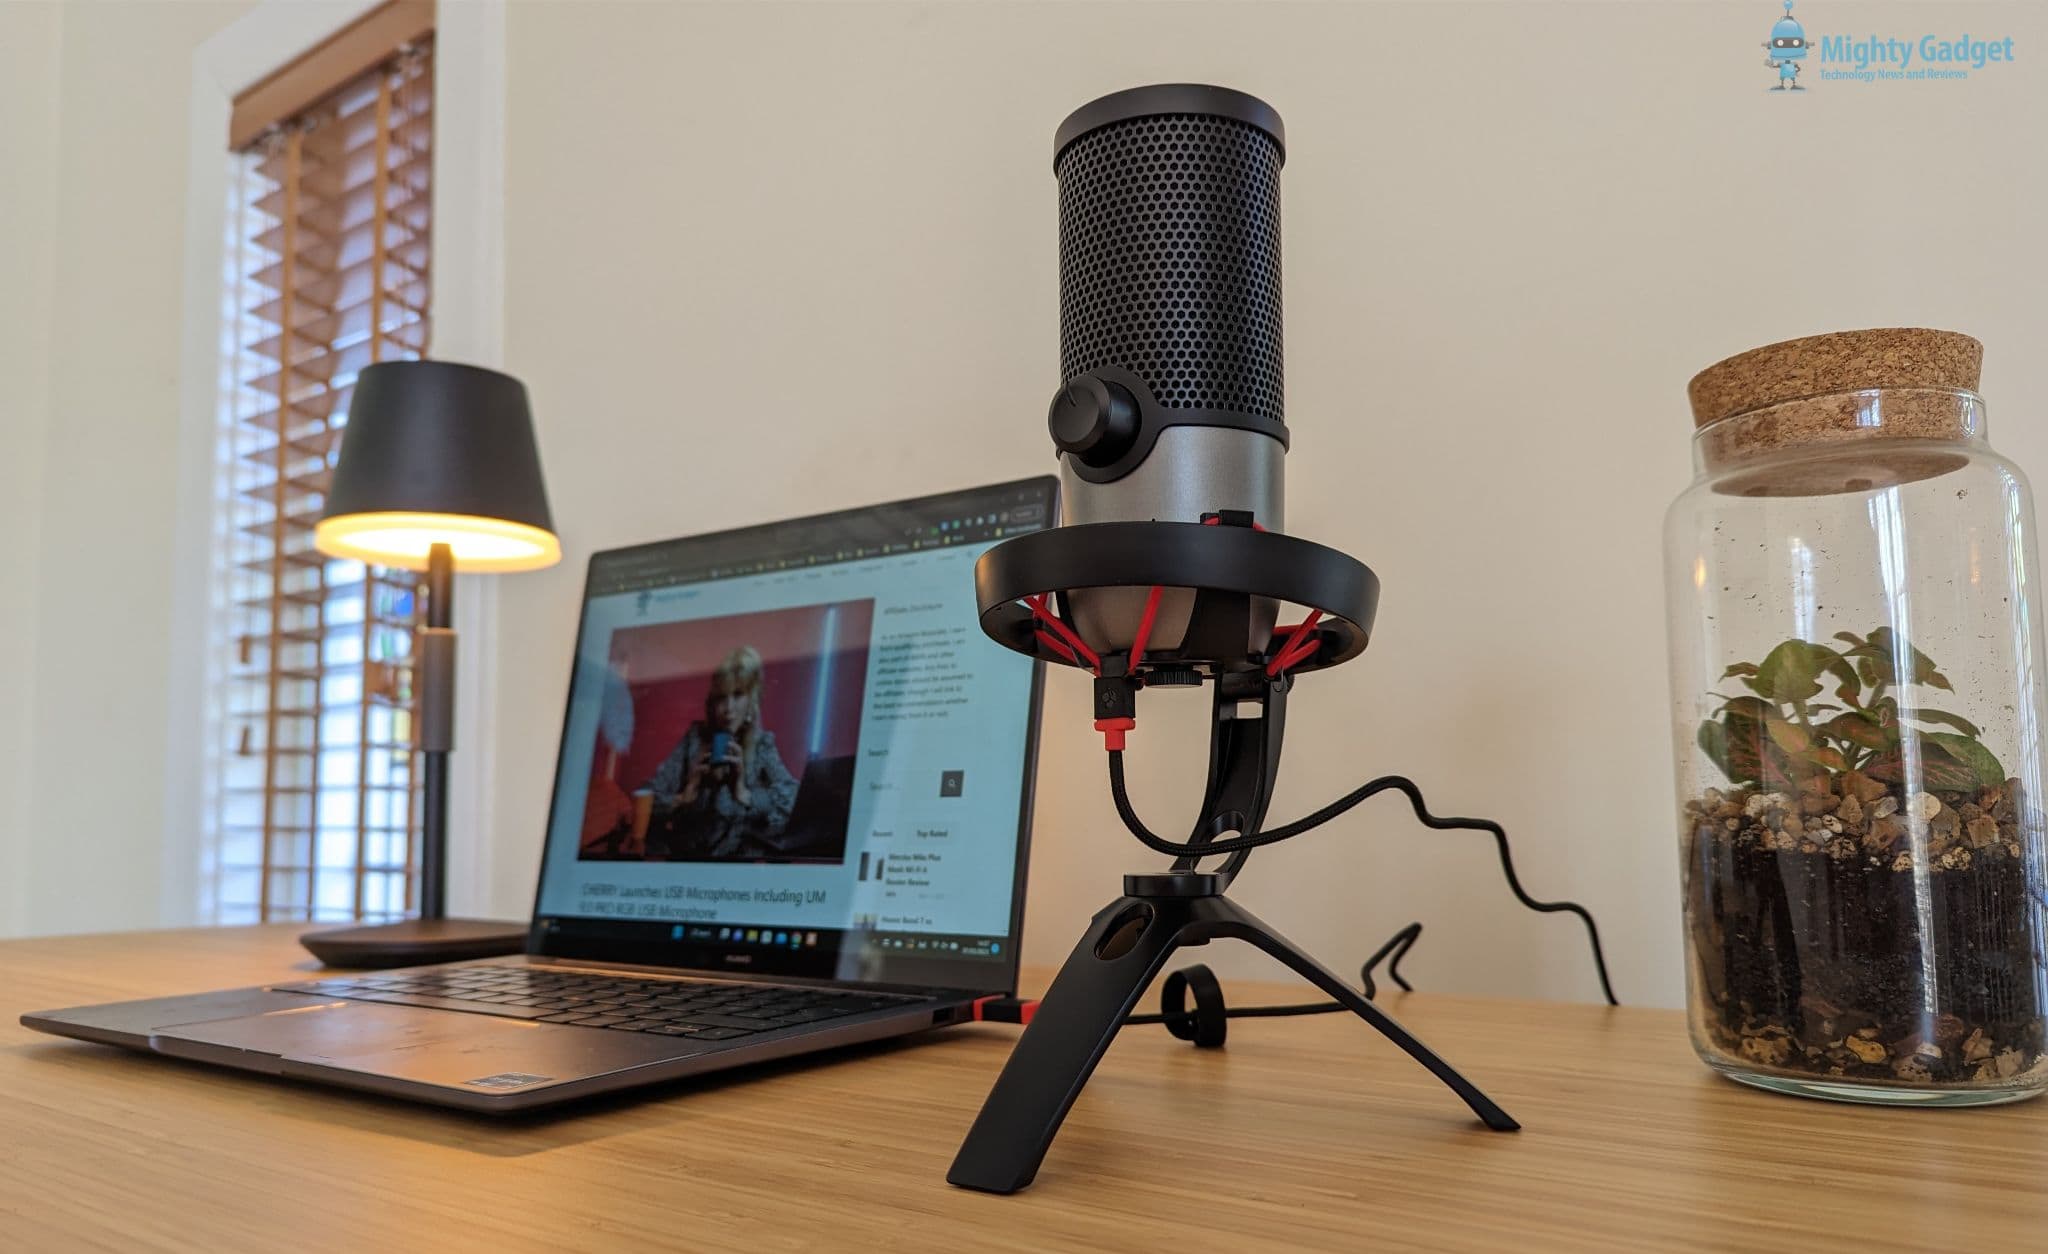 Cherry UM 6 0 Advanced USB Microphone Mighty Gadget Review2